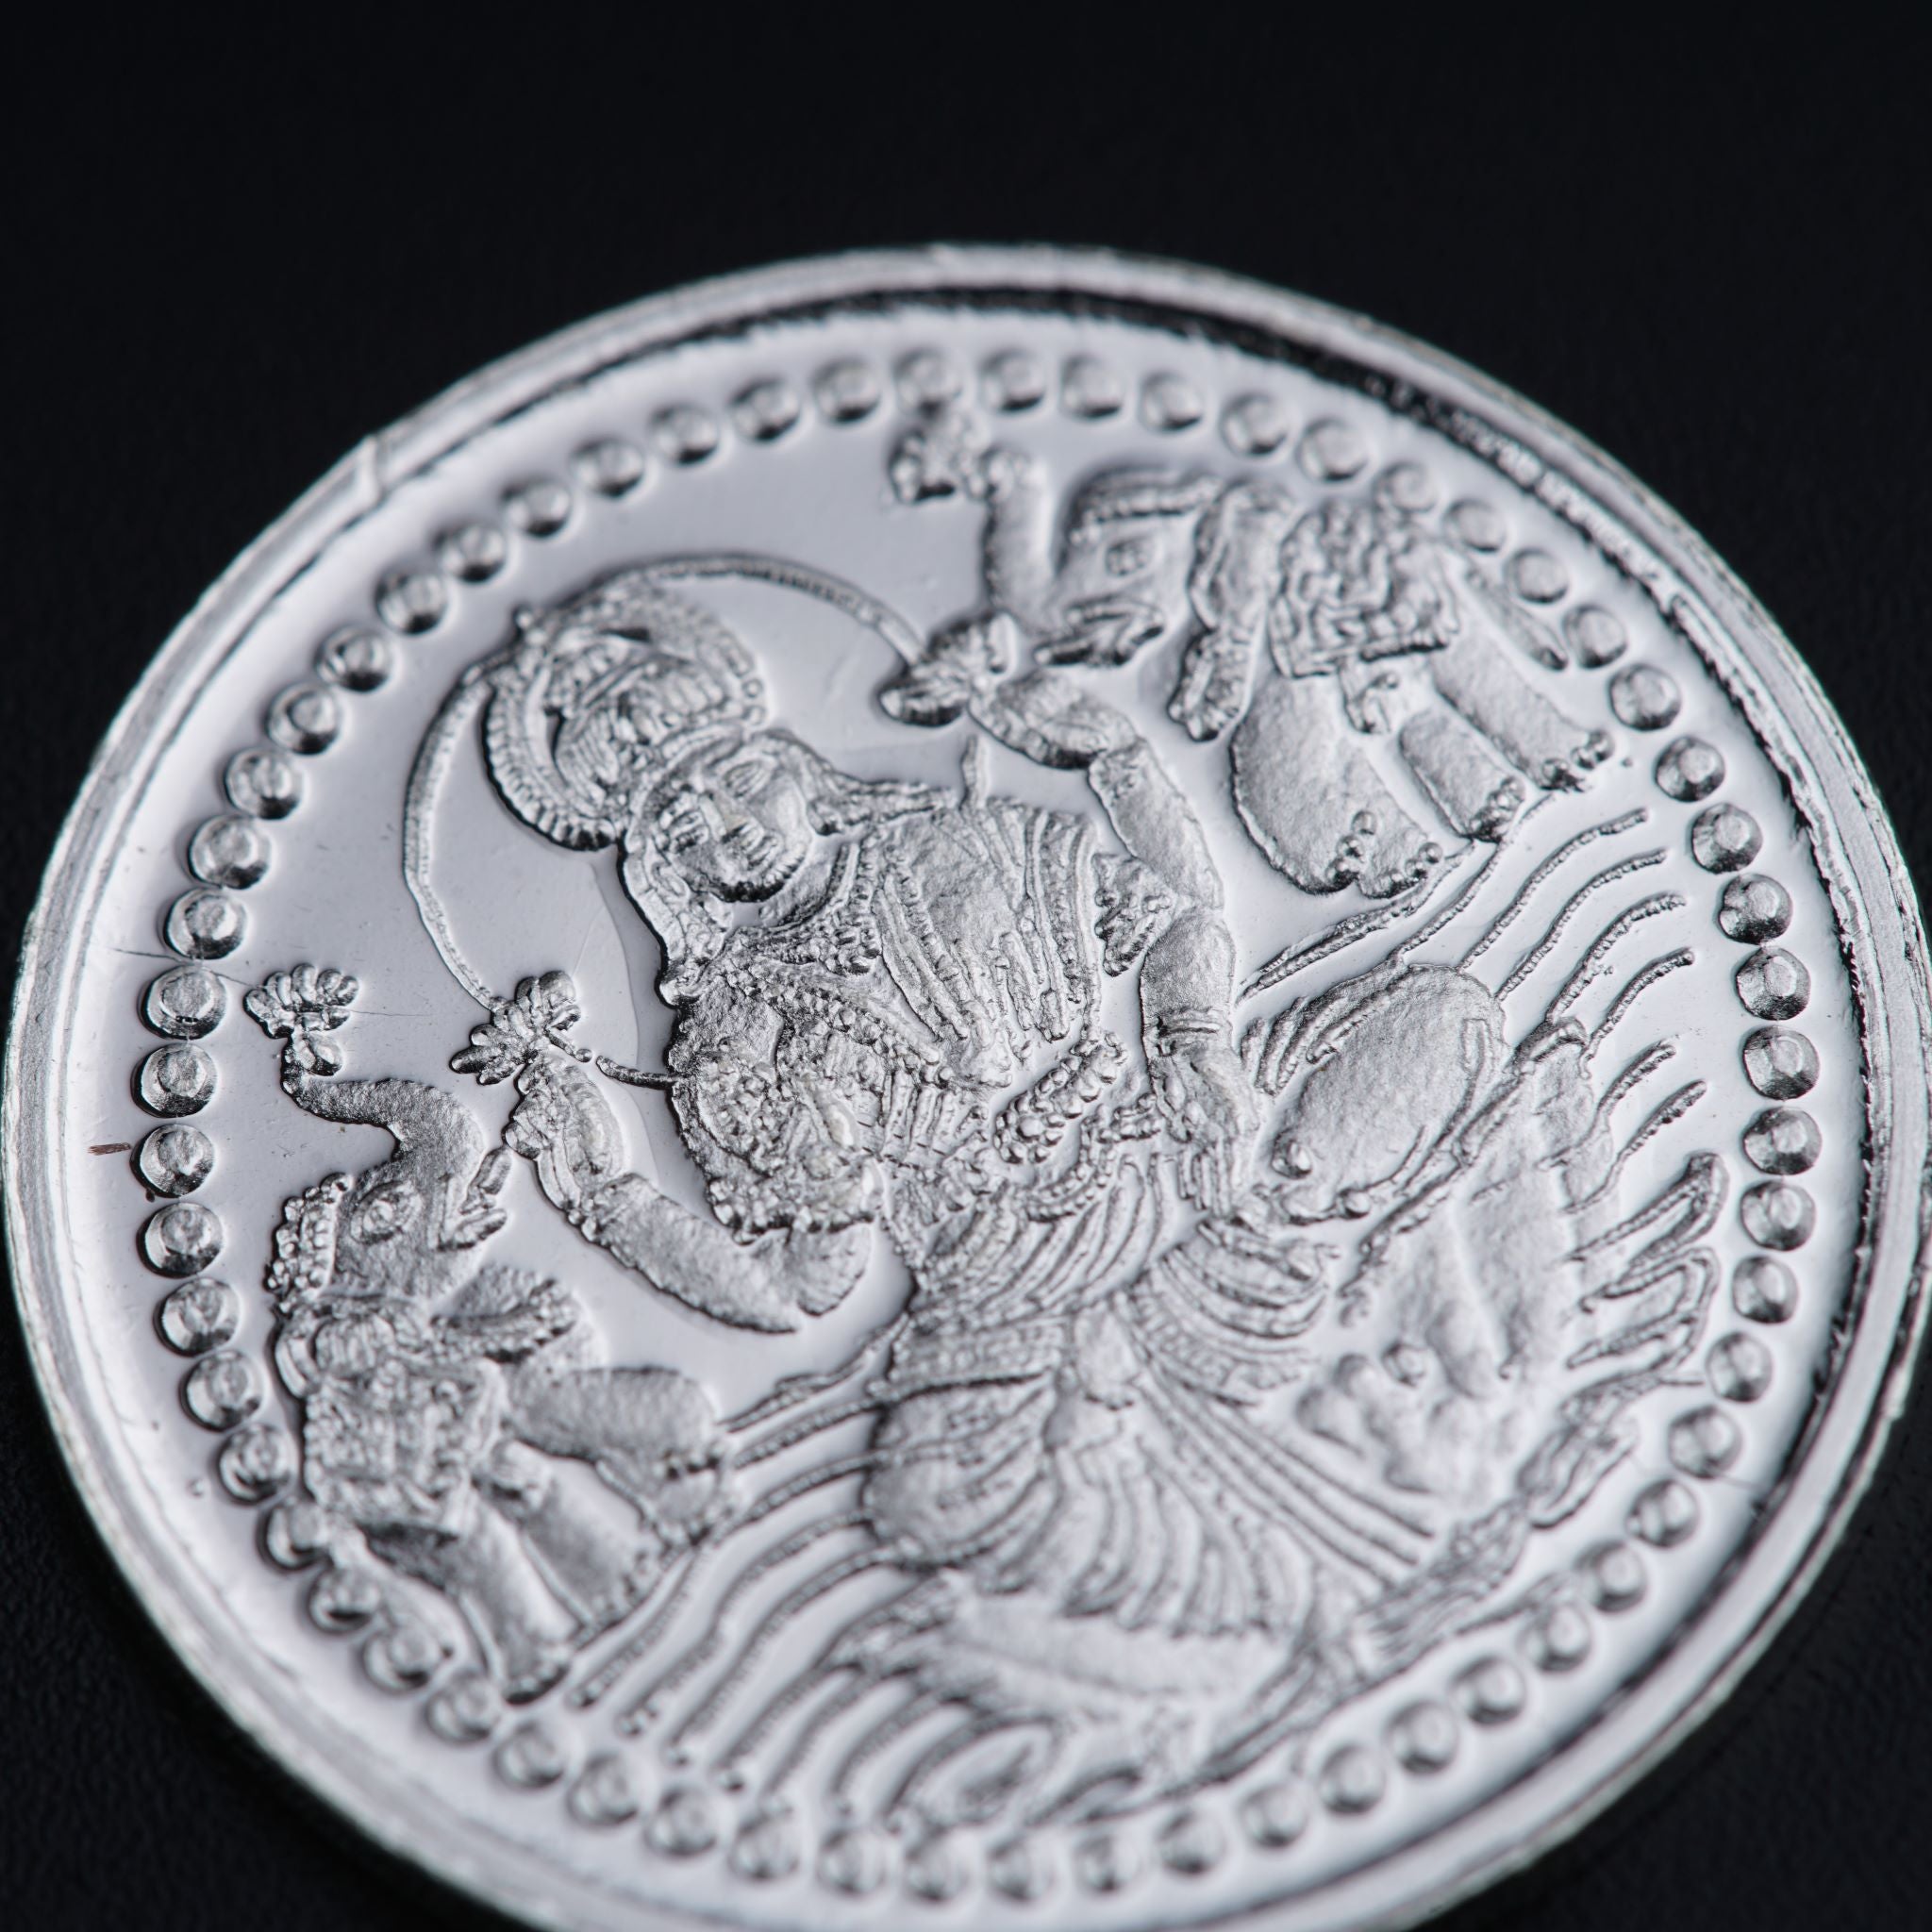 a silver coin with an image of a woman on it